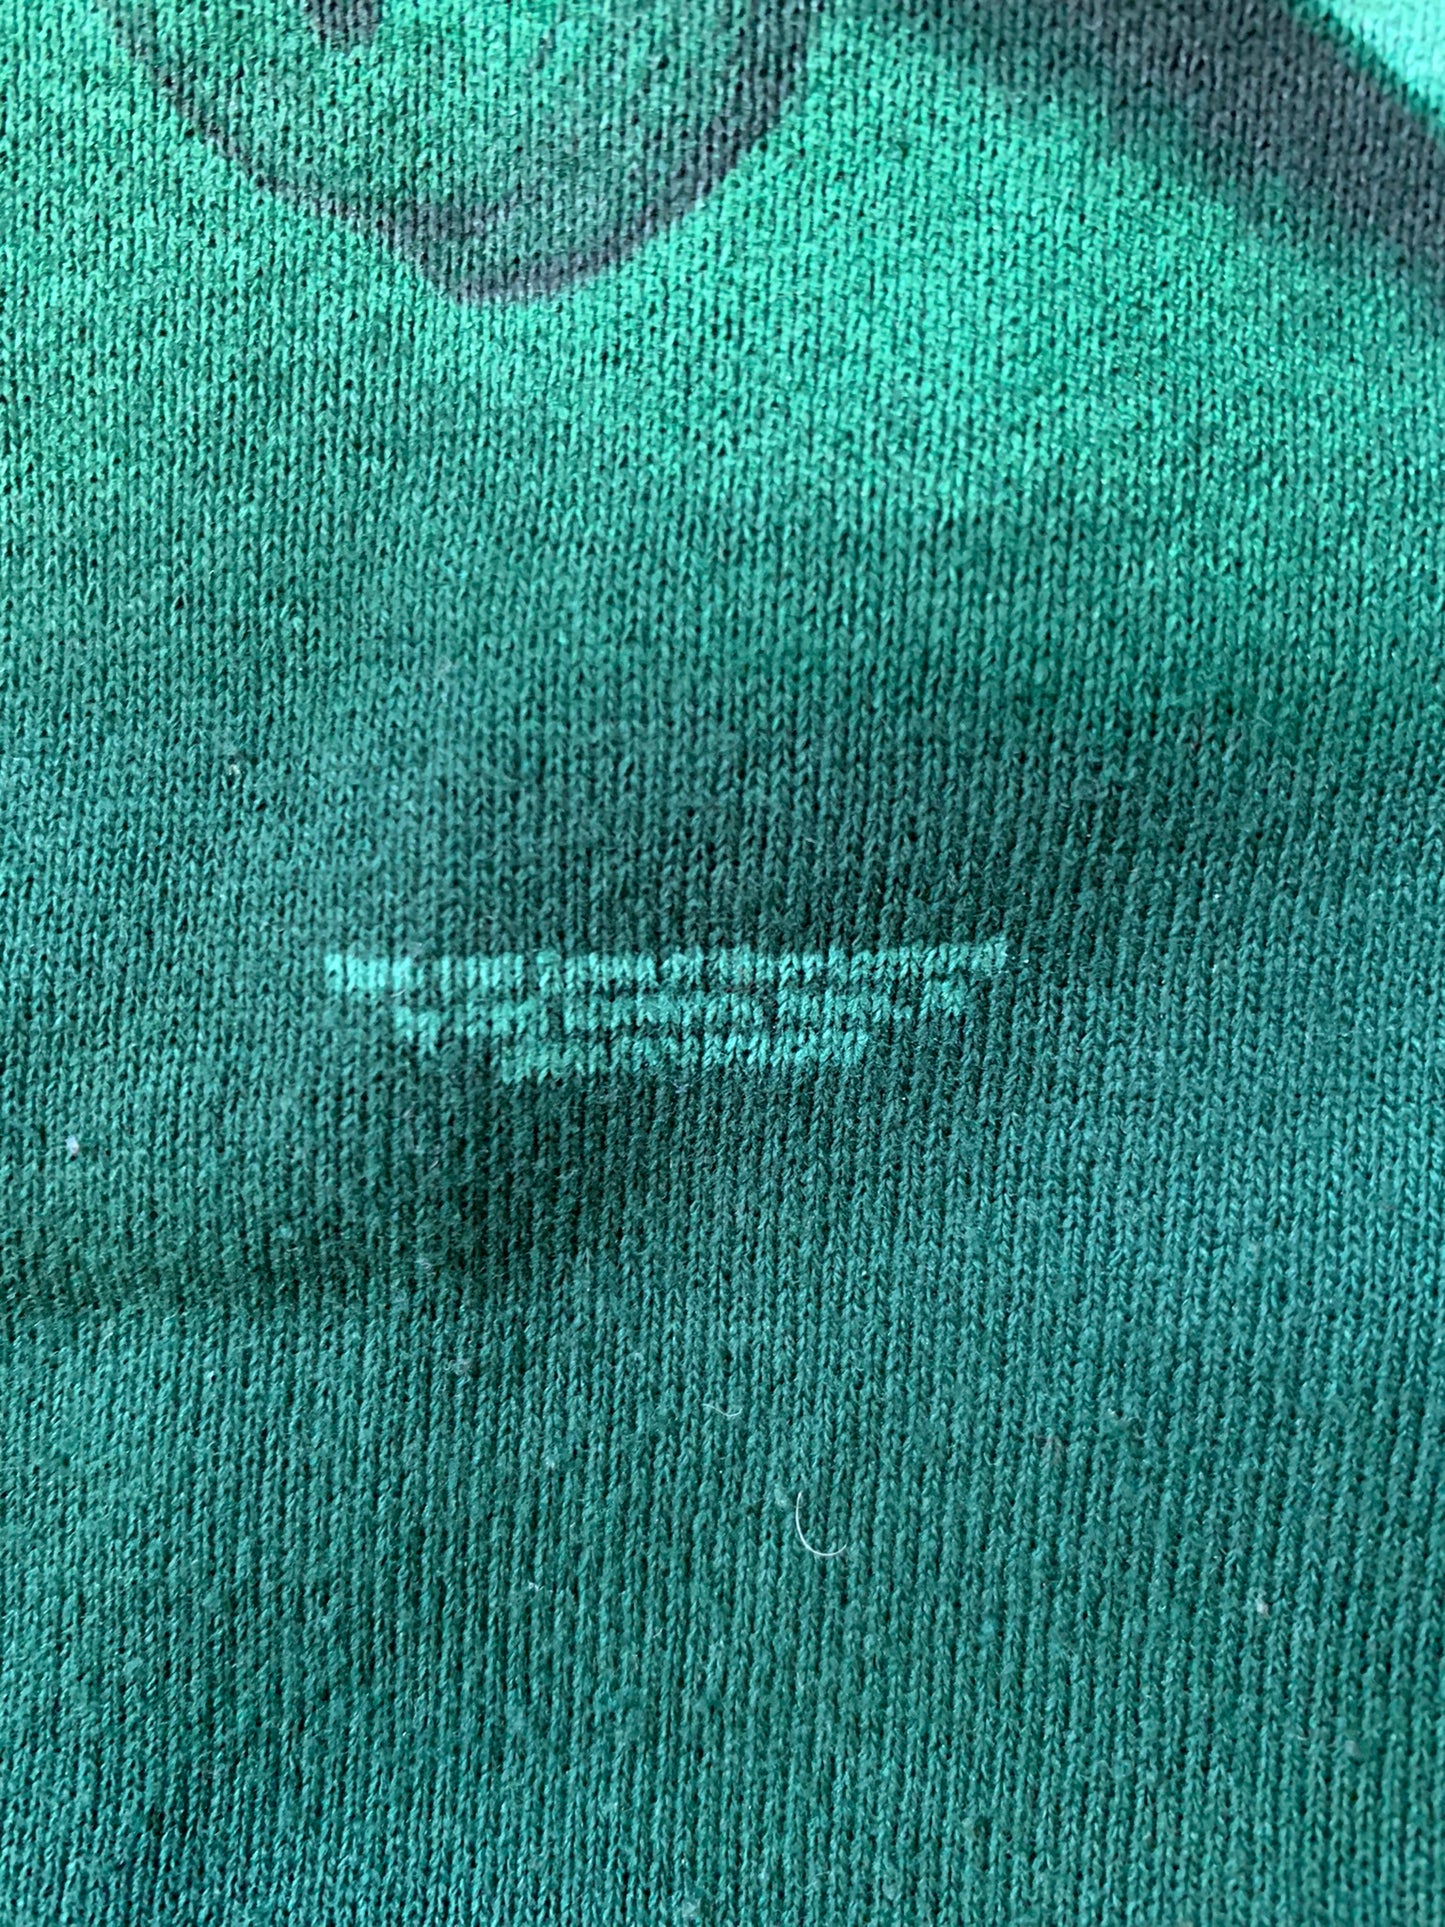 (S) 1997 Pro Player Green Bay Packers Crewneck